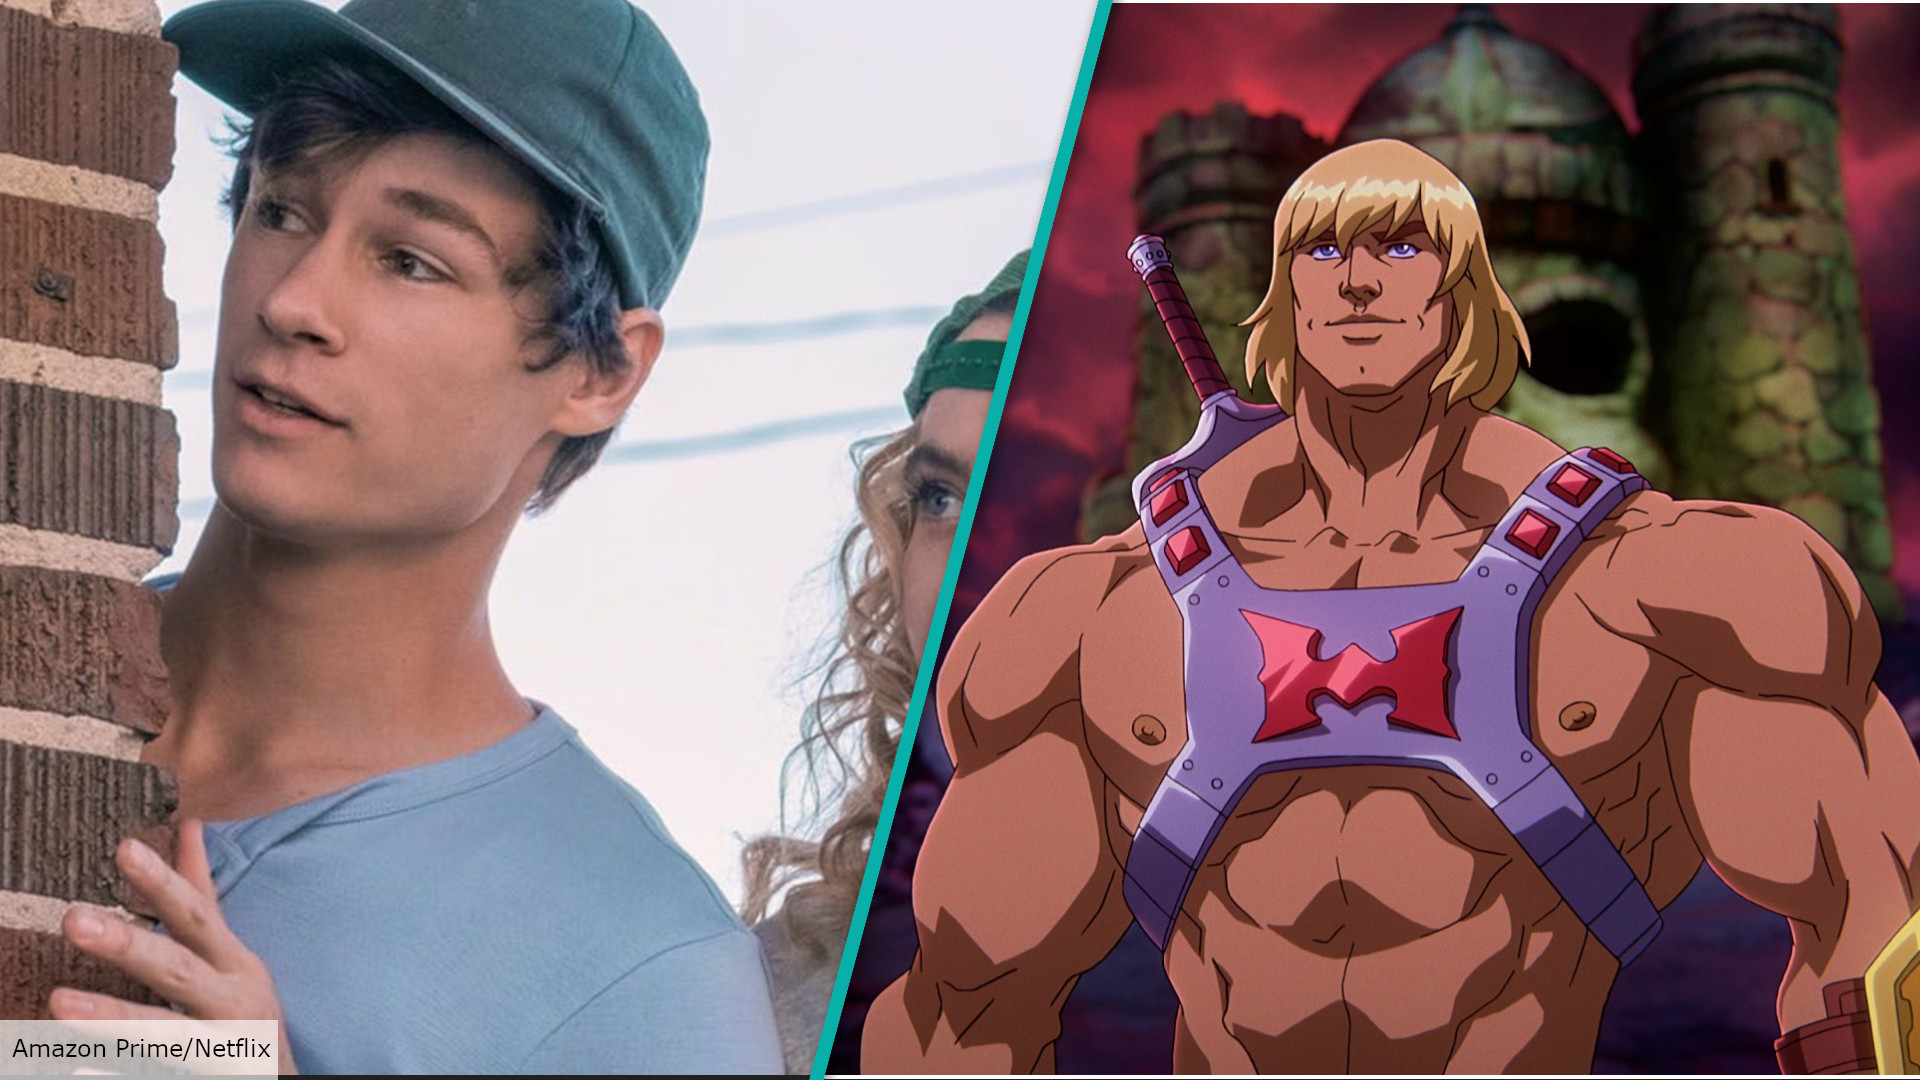 Kyle Allen to Play He-Man in 'Masters of the Universe' Movie for